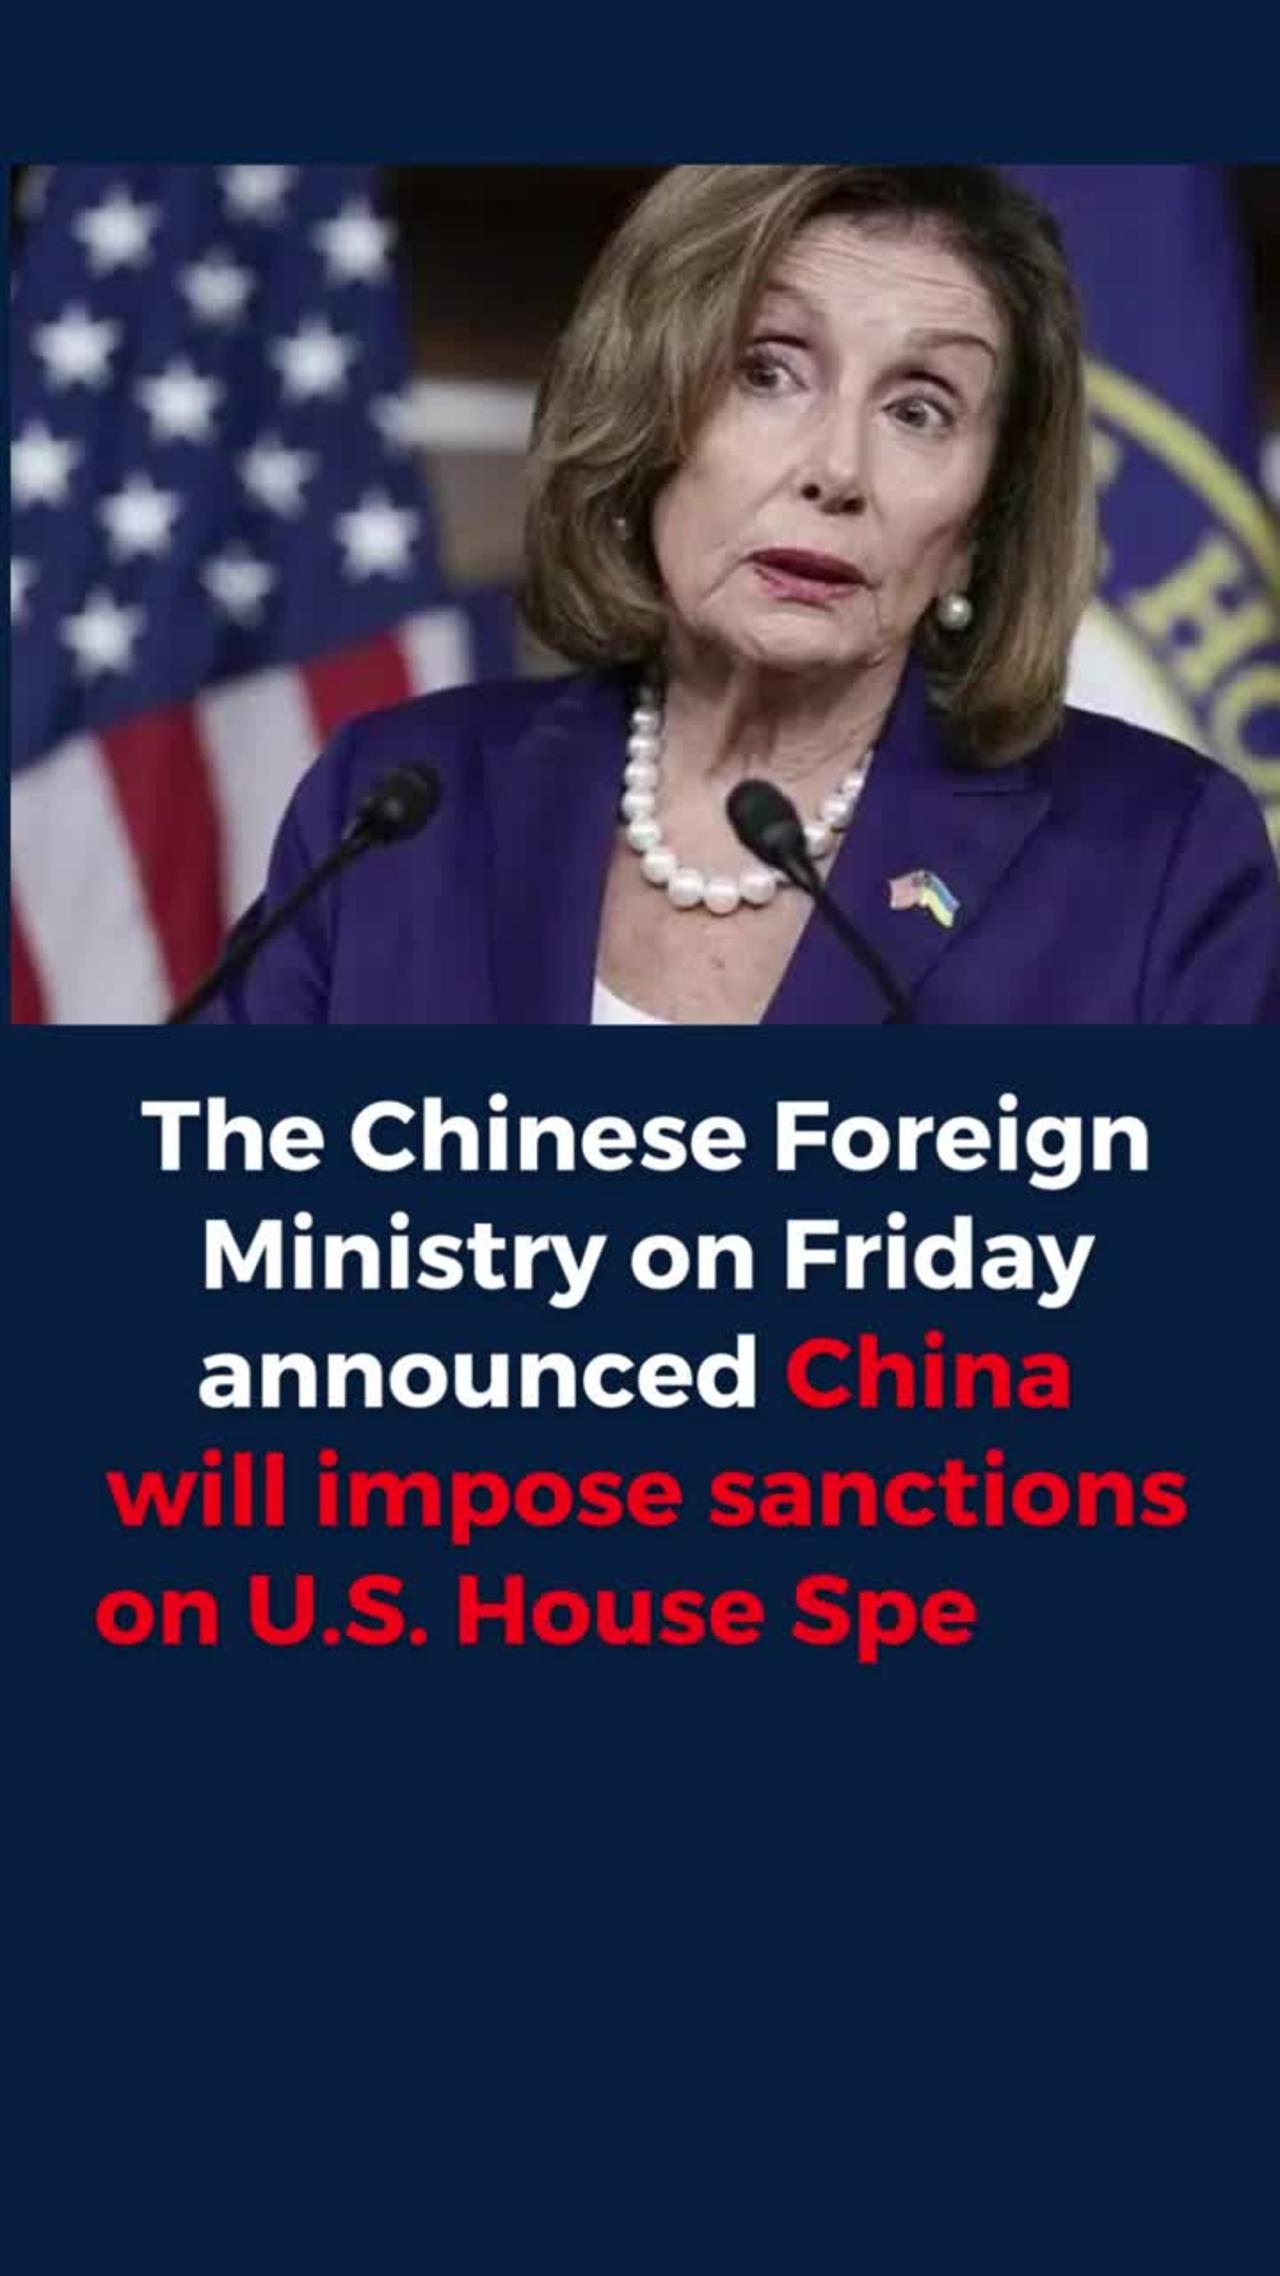 China will put sanctions on Pelosi and her direct relatives